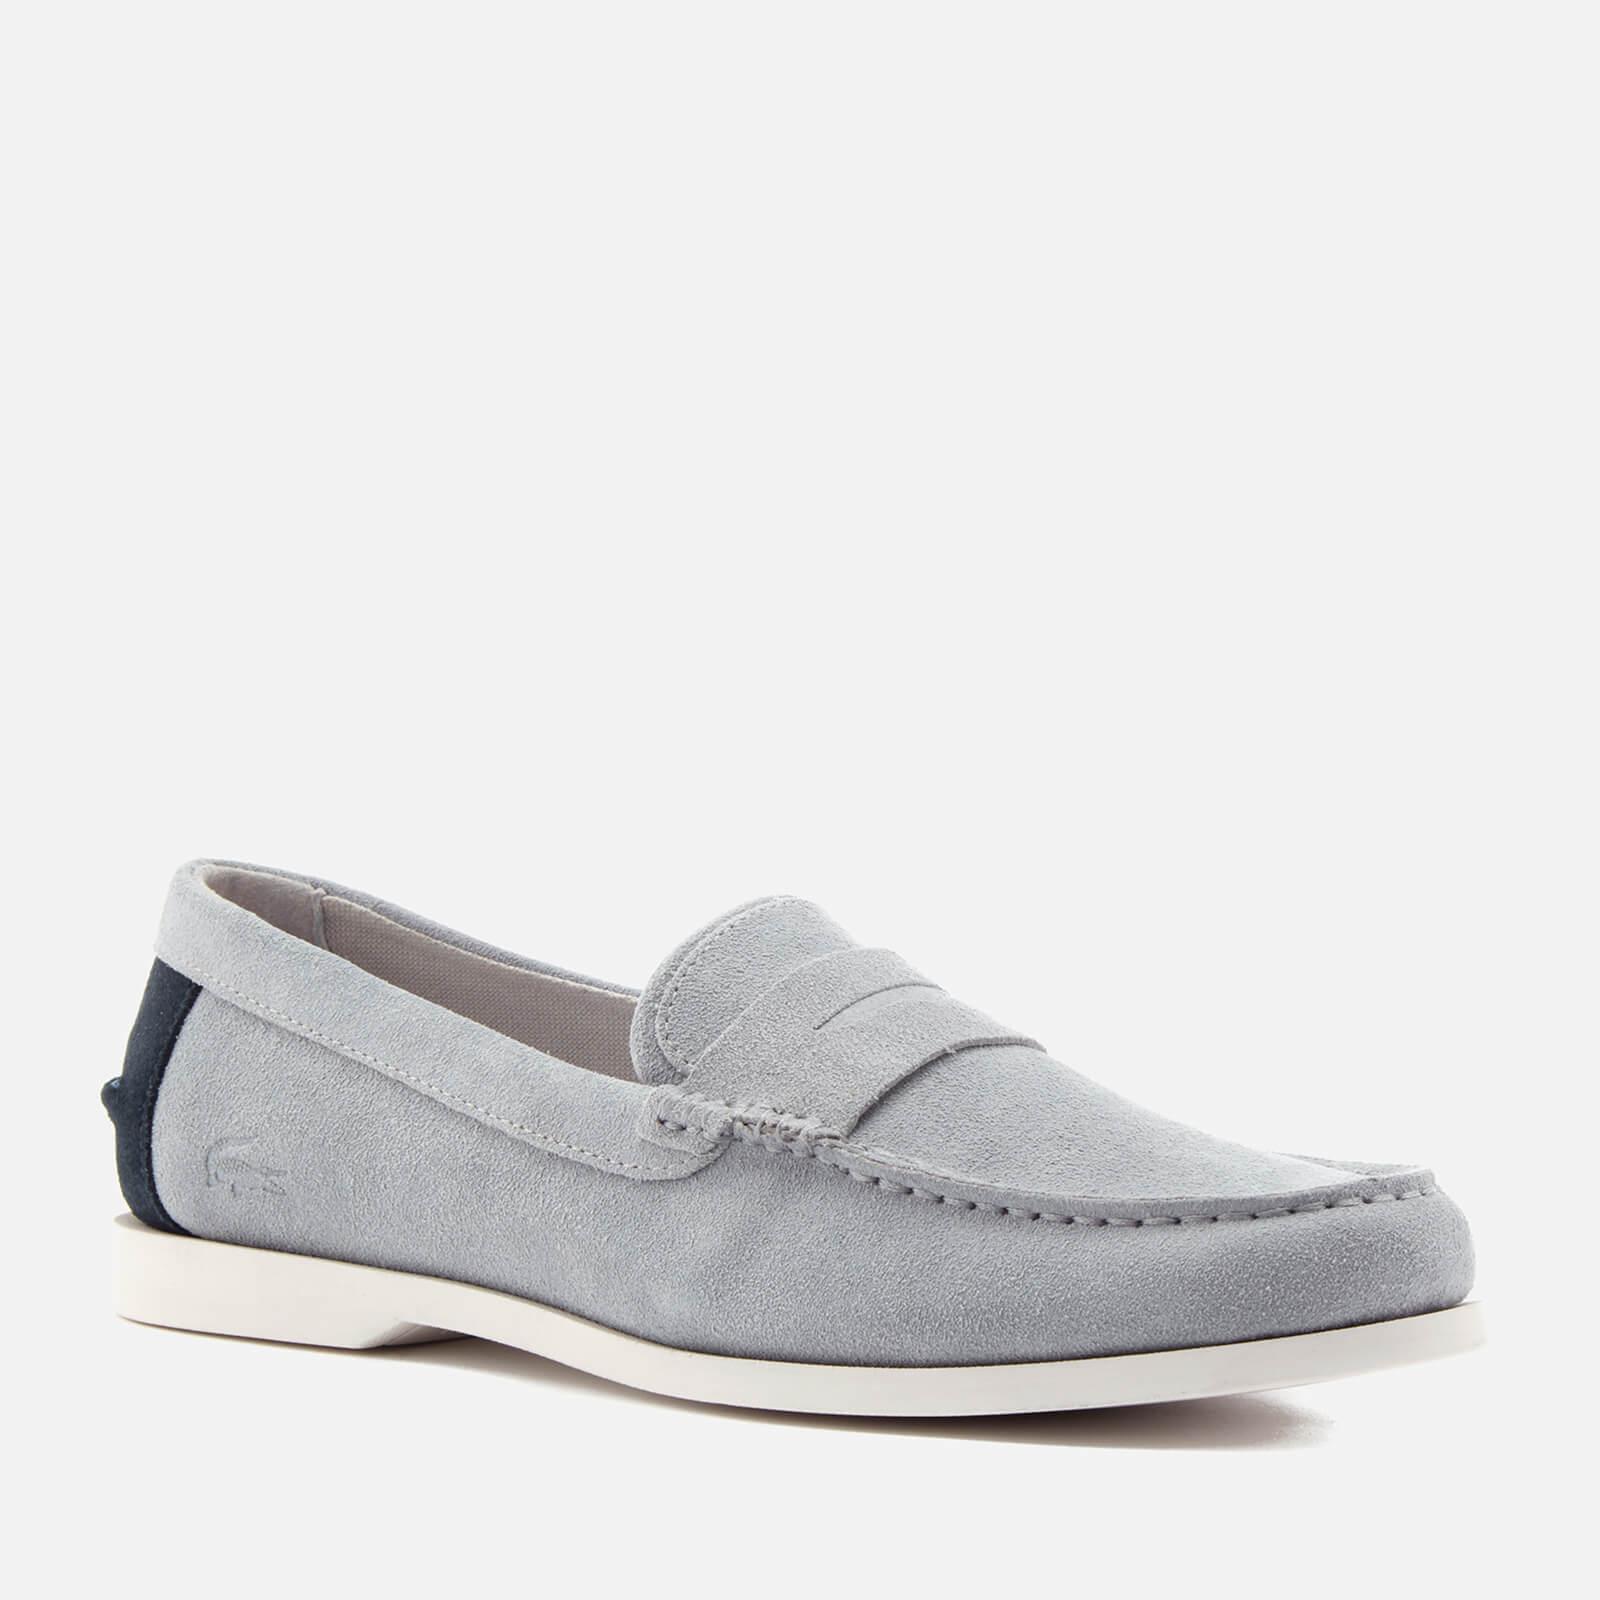 Lyst - Lacoste Navire Penny 216 Suede Loafers in Gray for Men